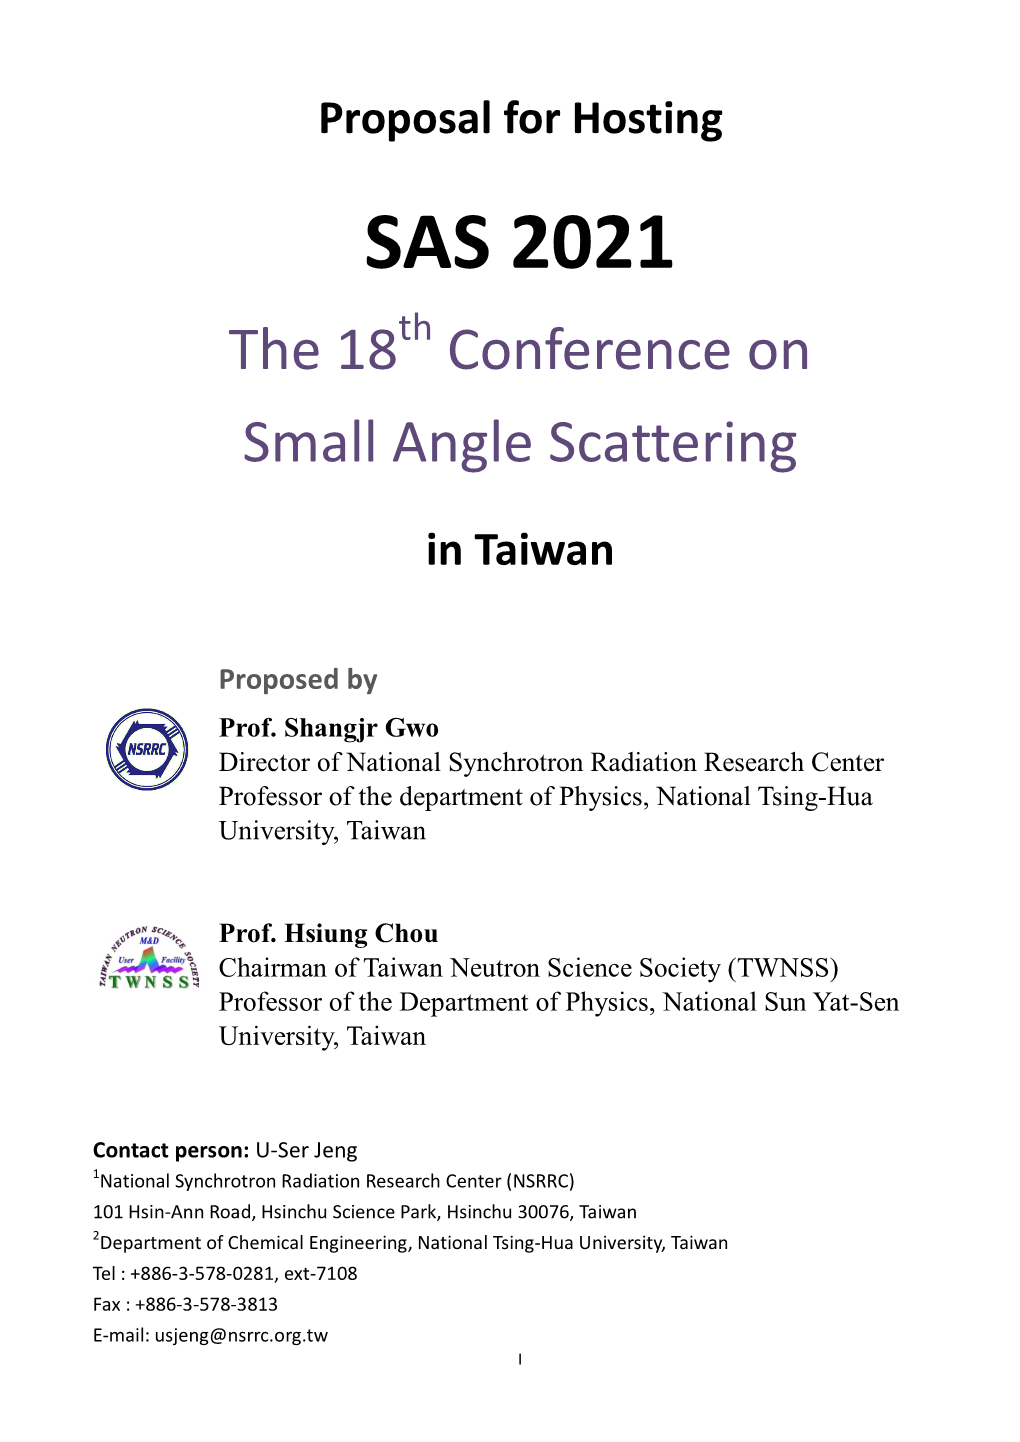 SAS 2021 the 18Th Conference on Small Angle Scattering